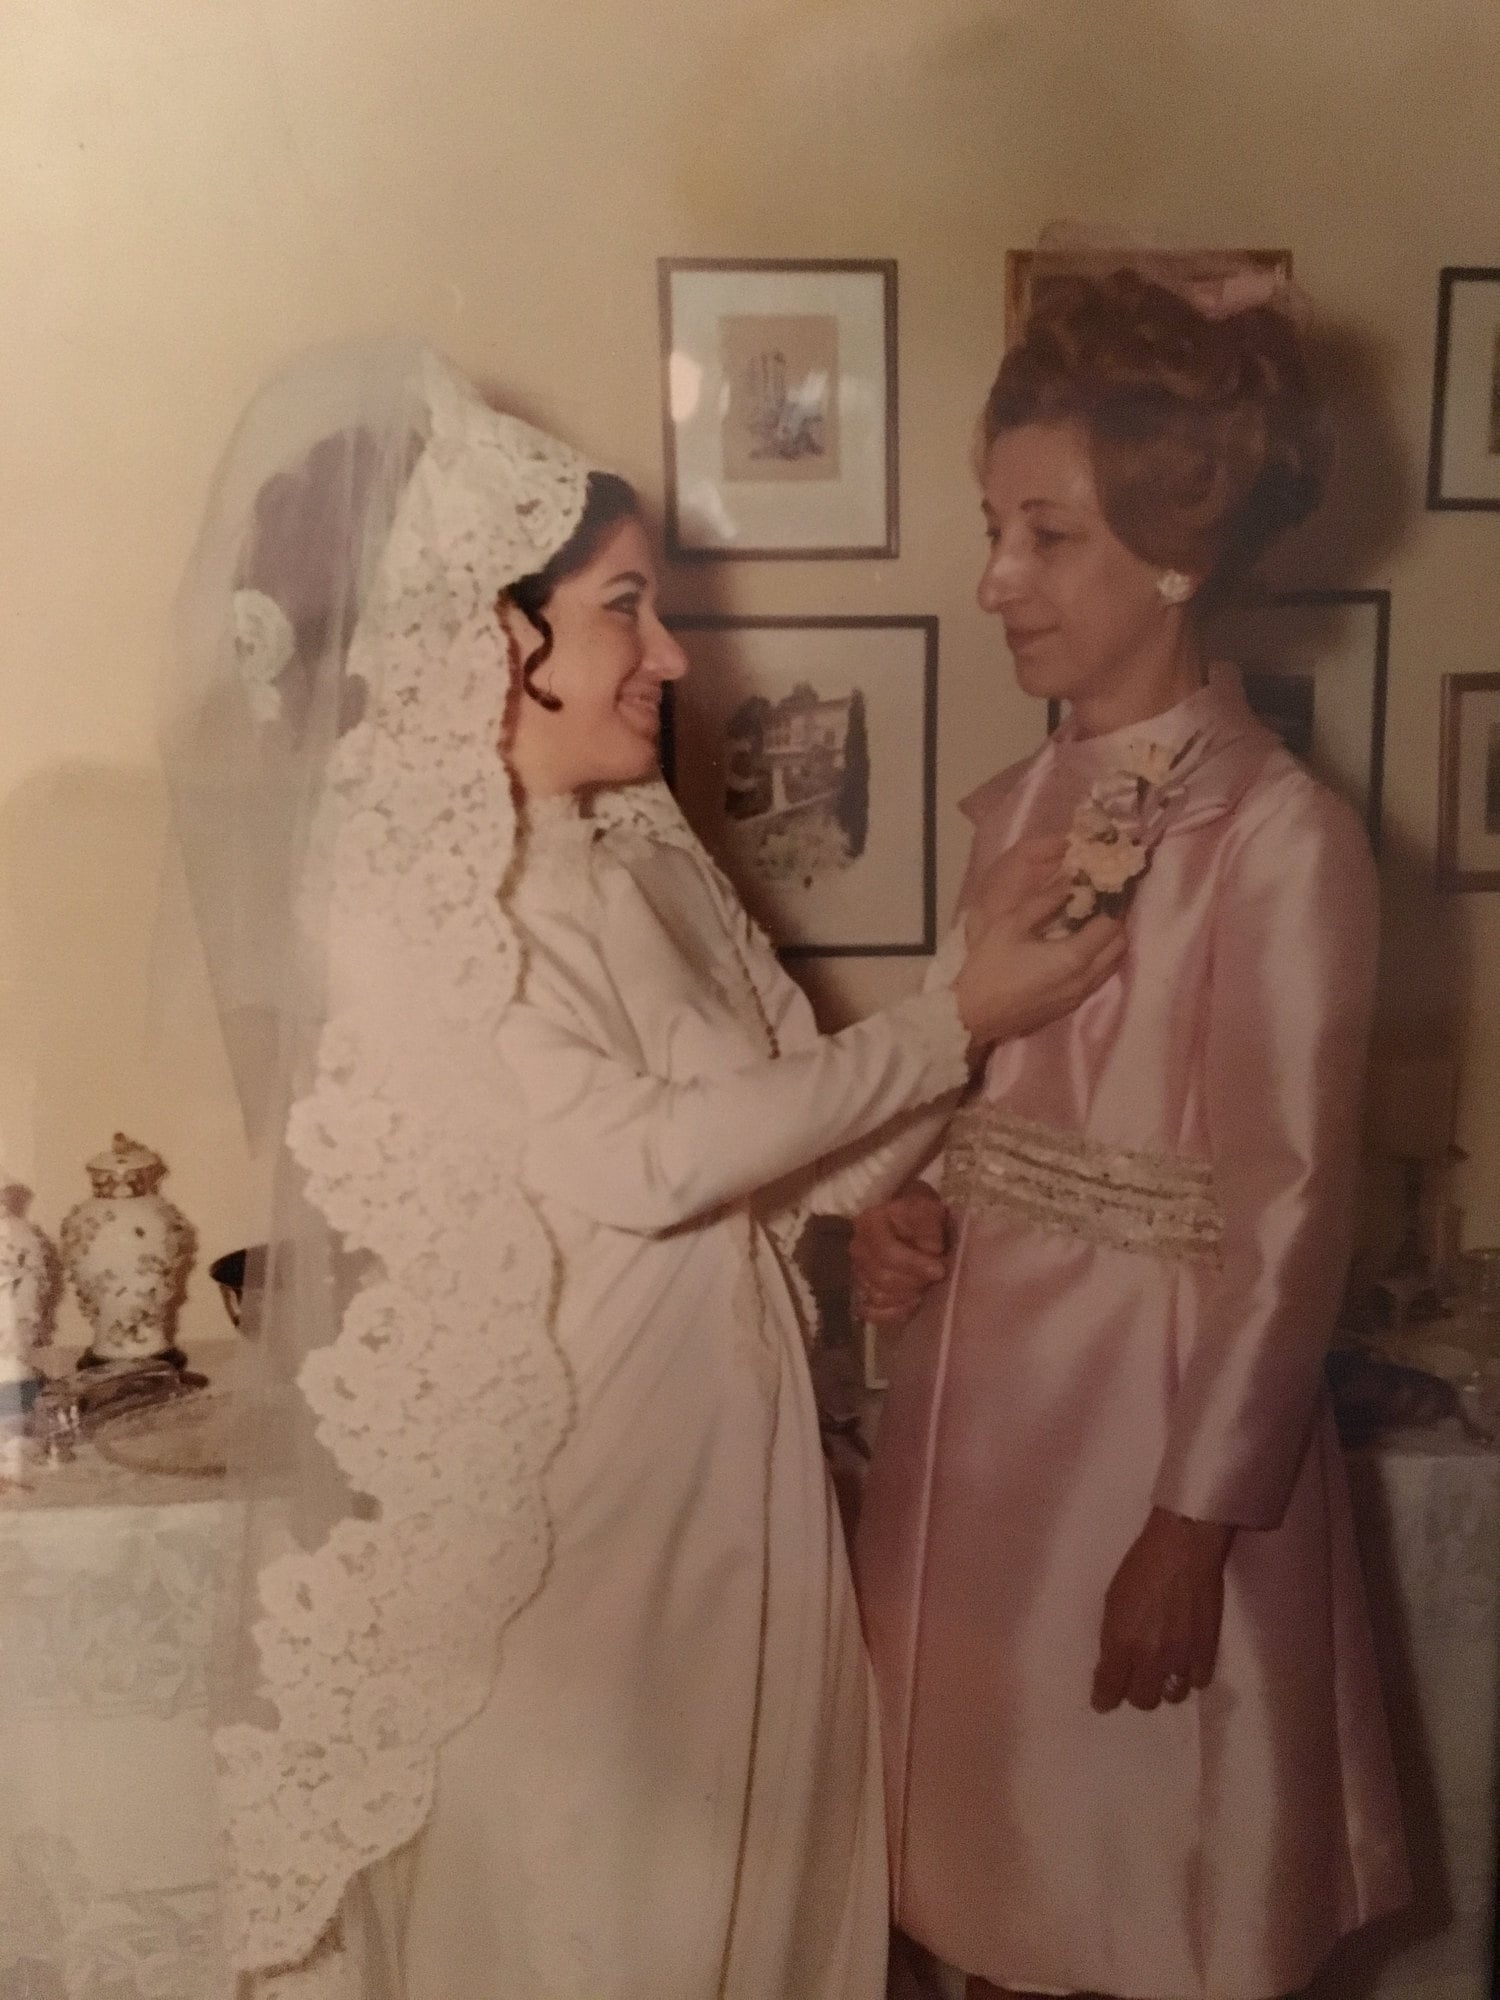 My Yaya, Helen Hadges (on the right), when she was 49 in 1969 at my parents wedding. This was 10 years after her diagnosis.